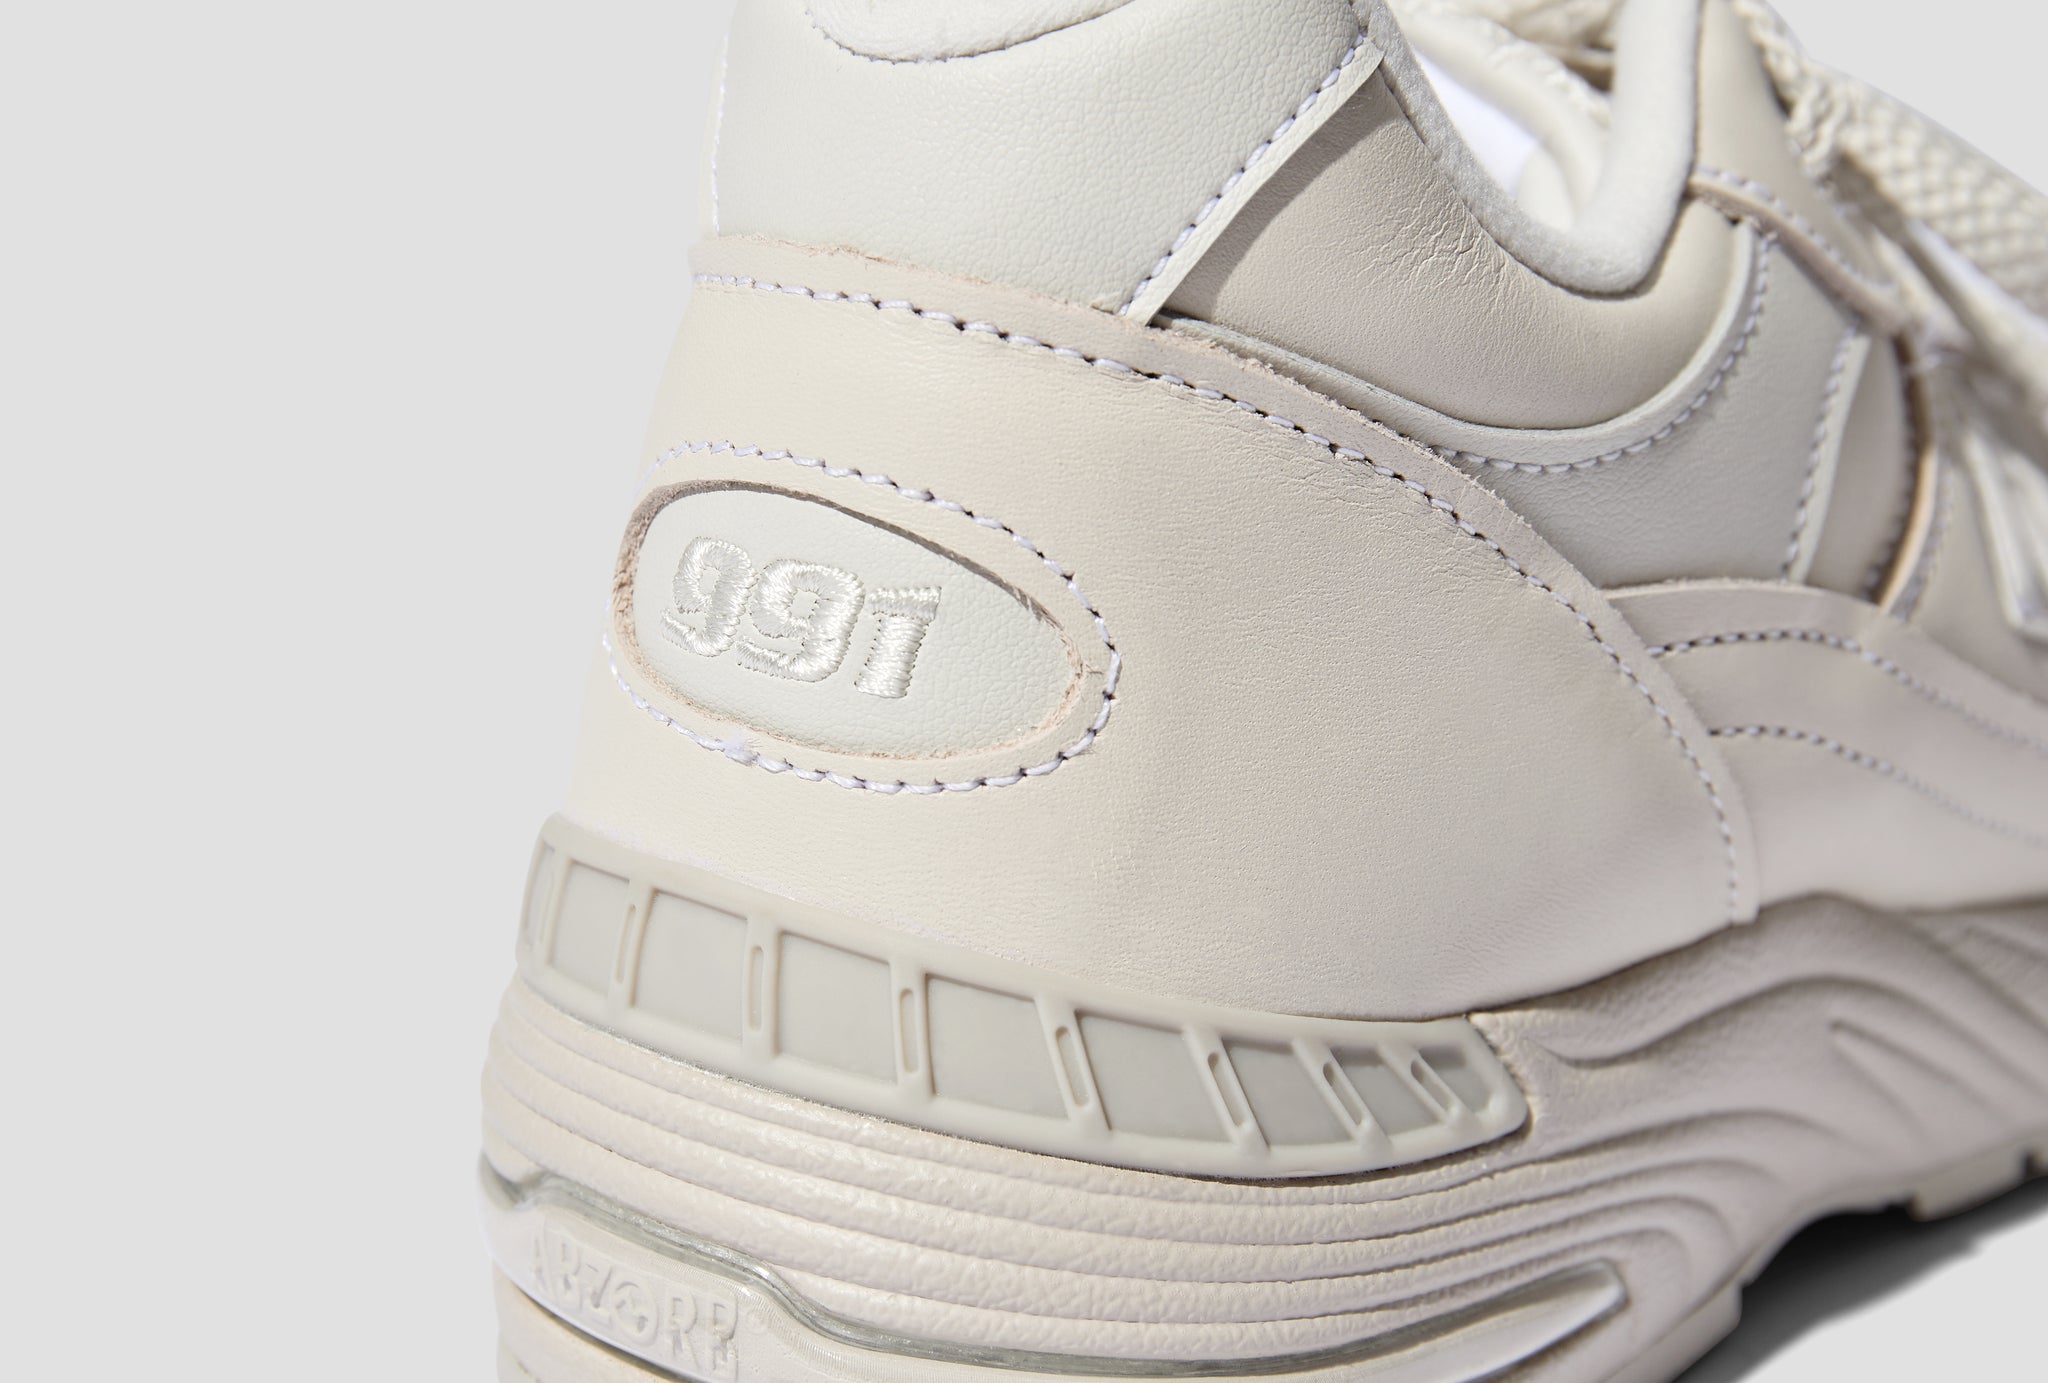 MADE IN UK 991V1 CONTEMPO LUXE - LIGHT GREY/MOONBEAM M991OW